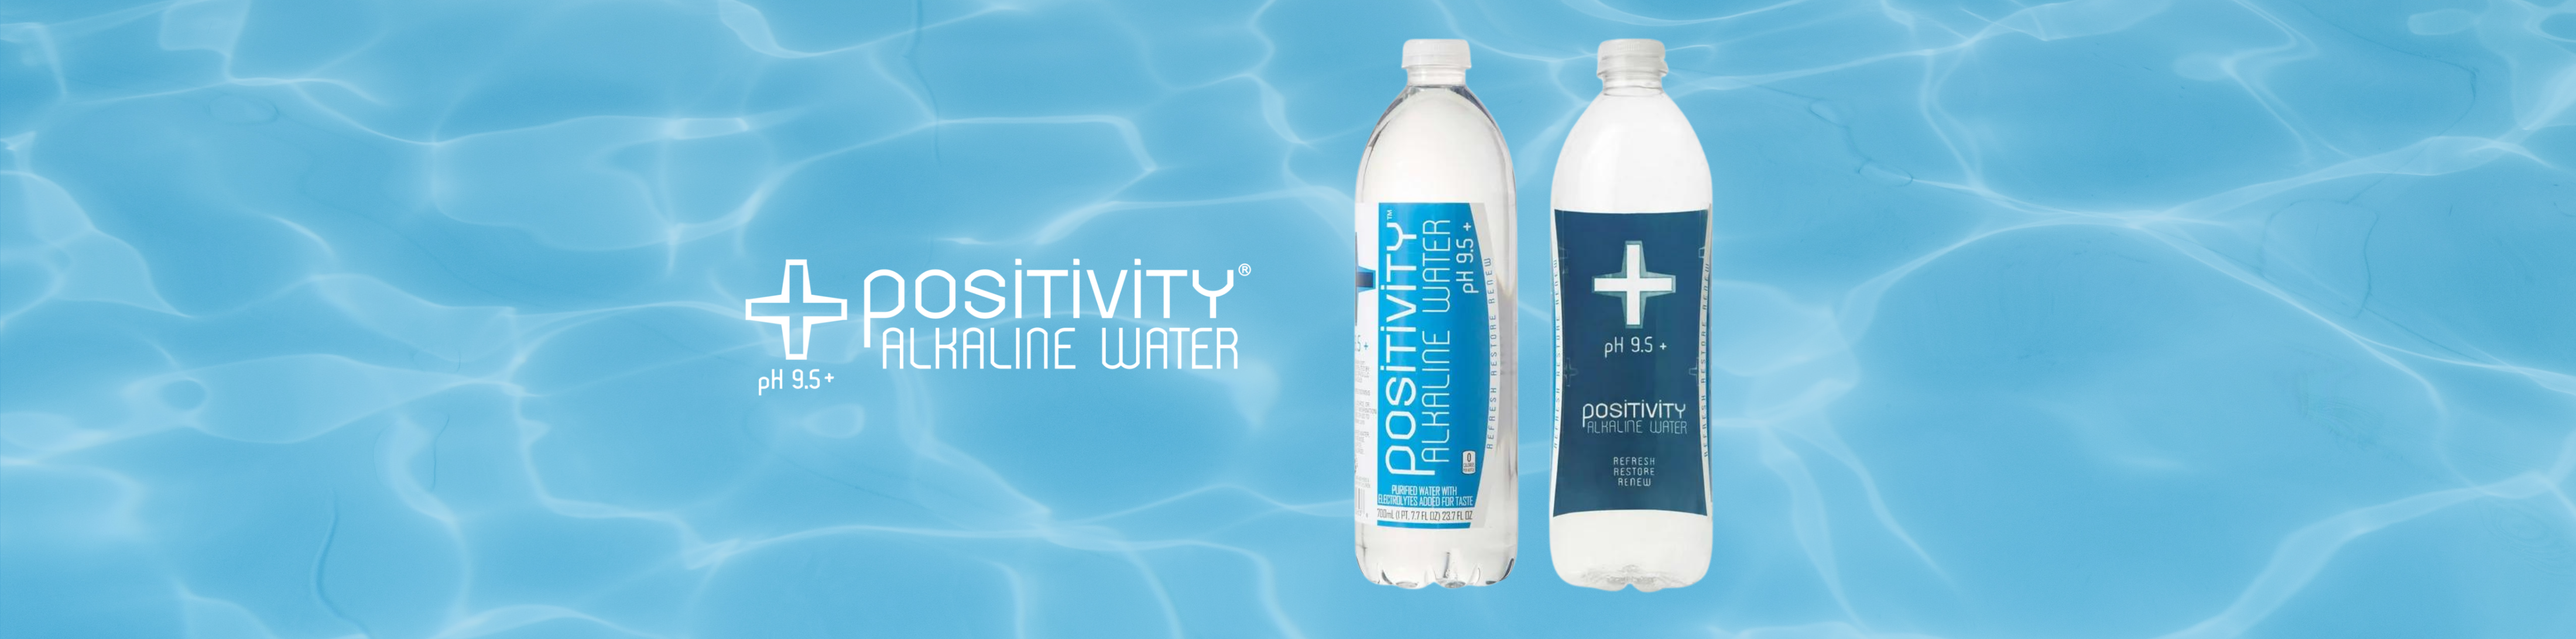 Positivity Alkaline Water – A Journey from Concept to Walmart Shelves